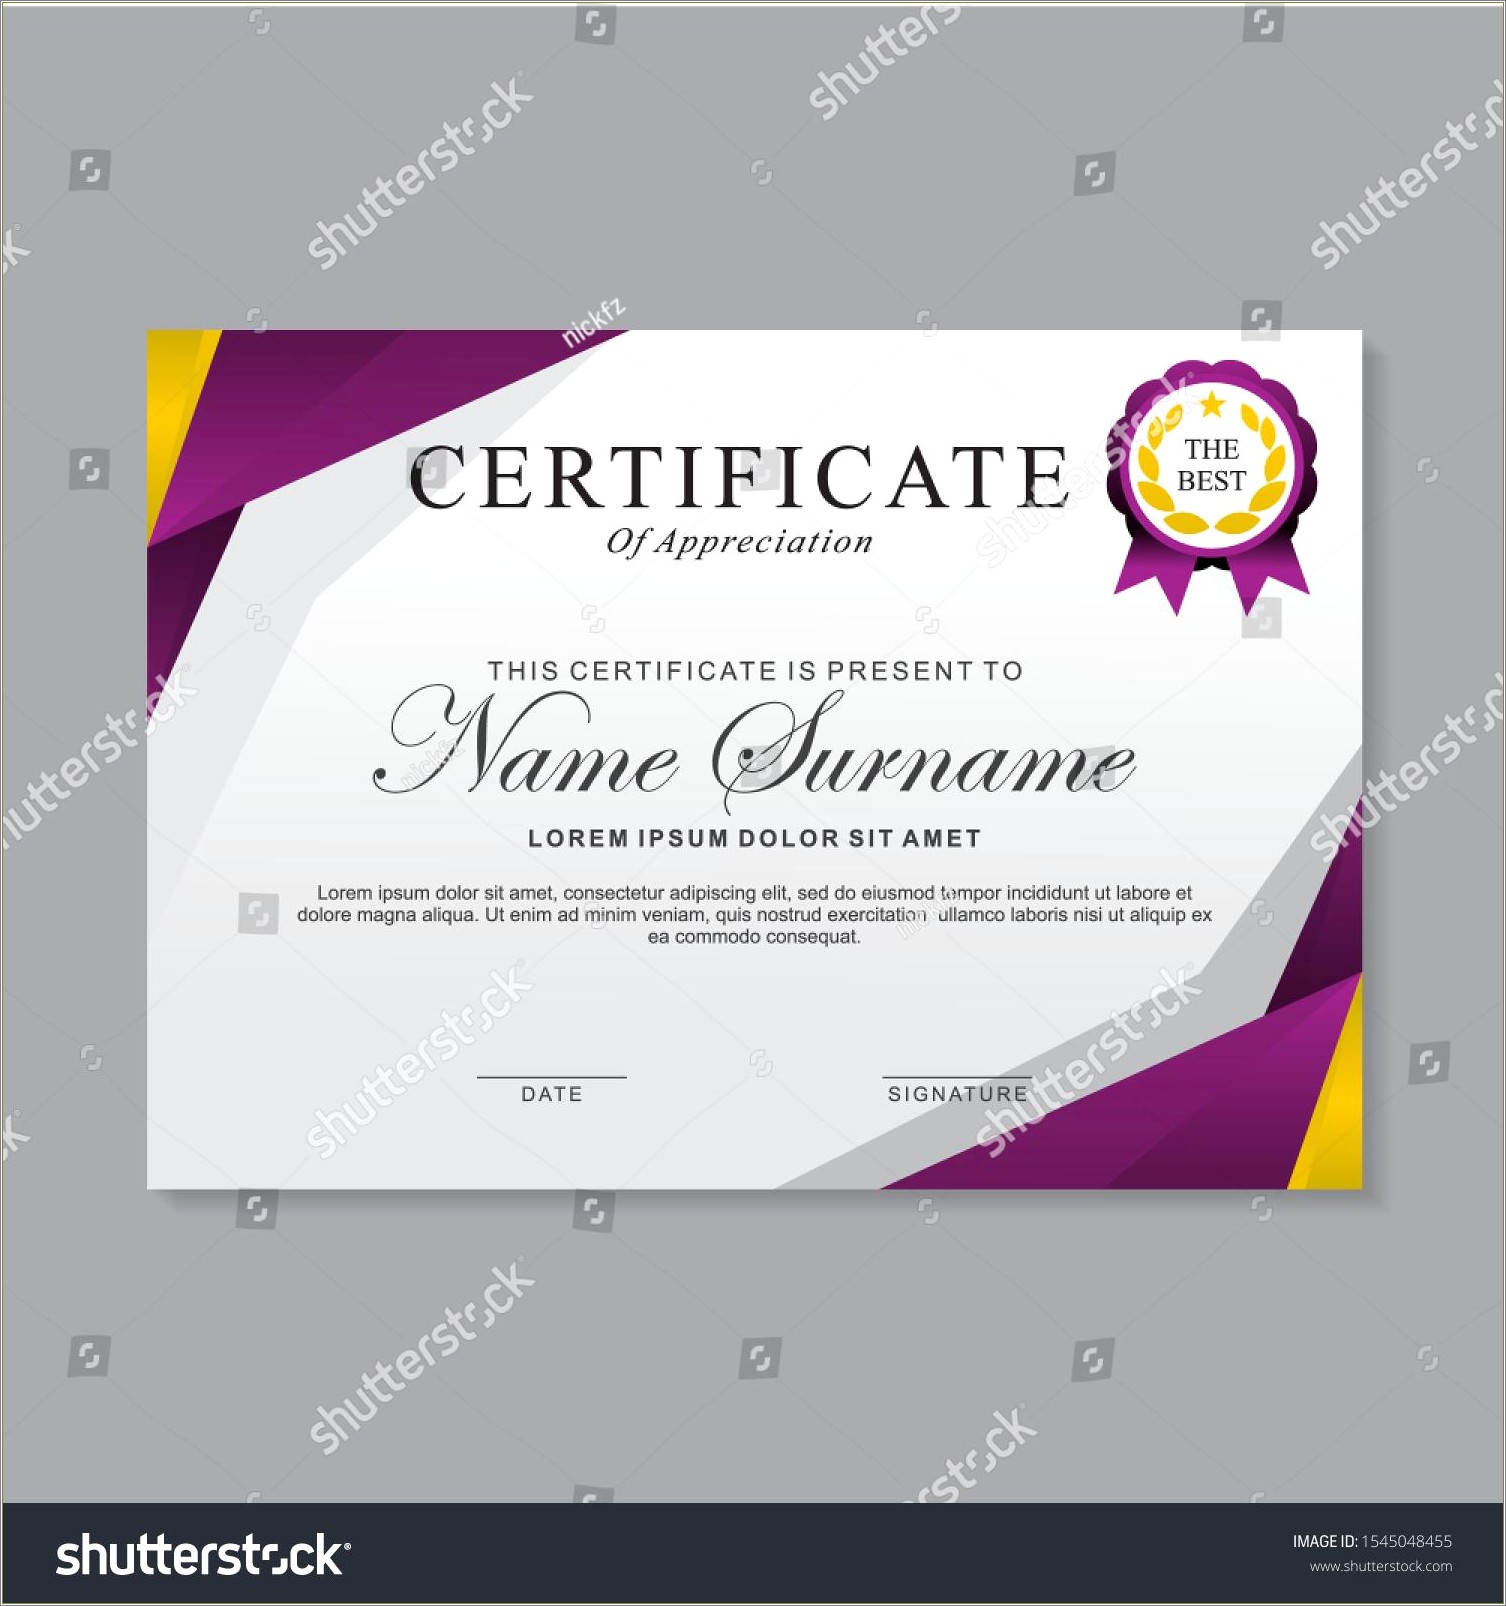 Certificate Templates Free Purple And Green